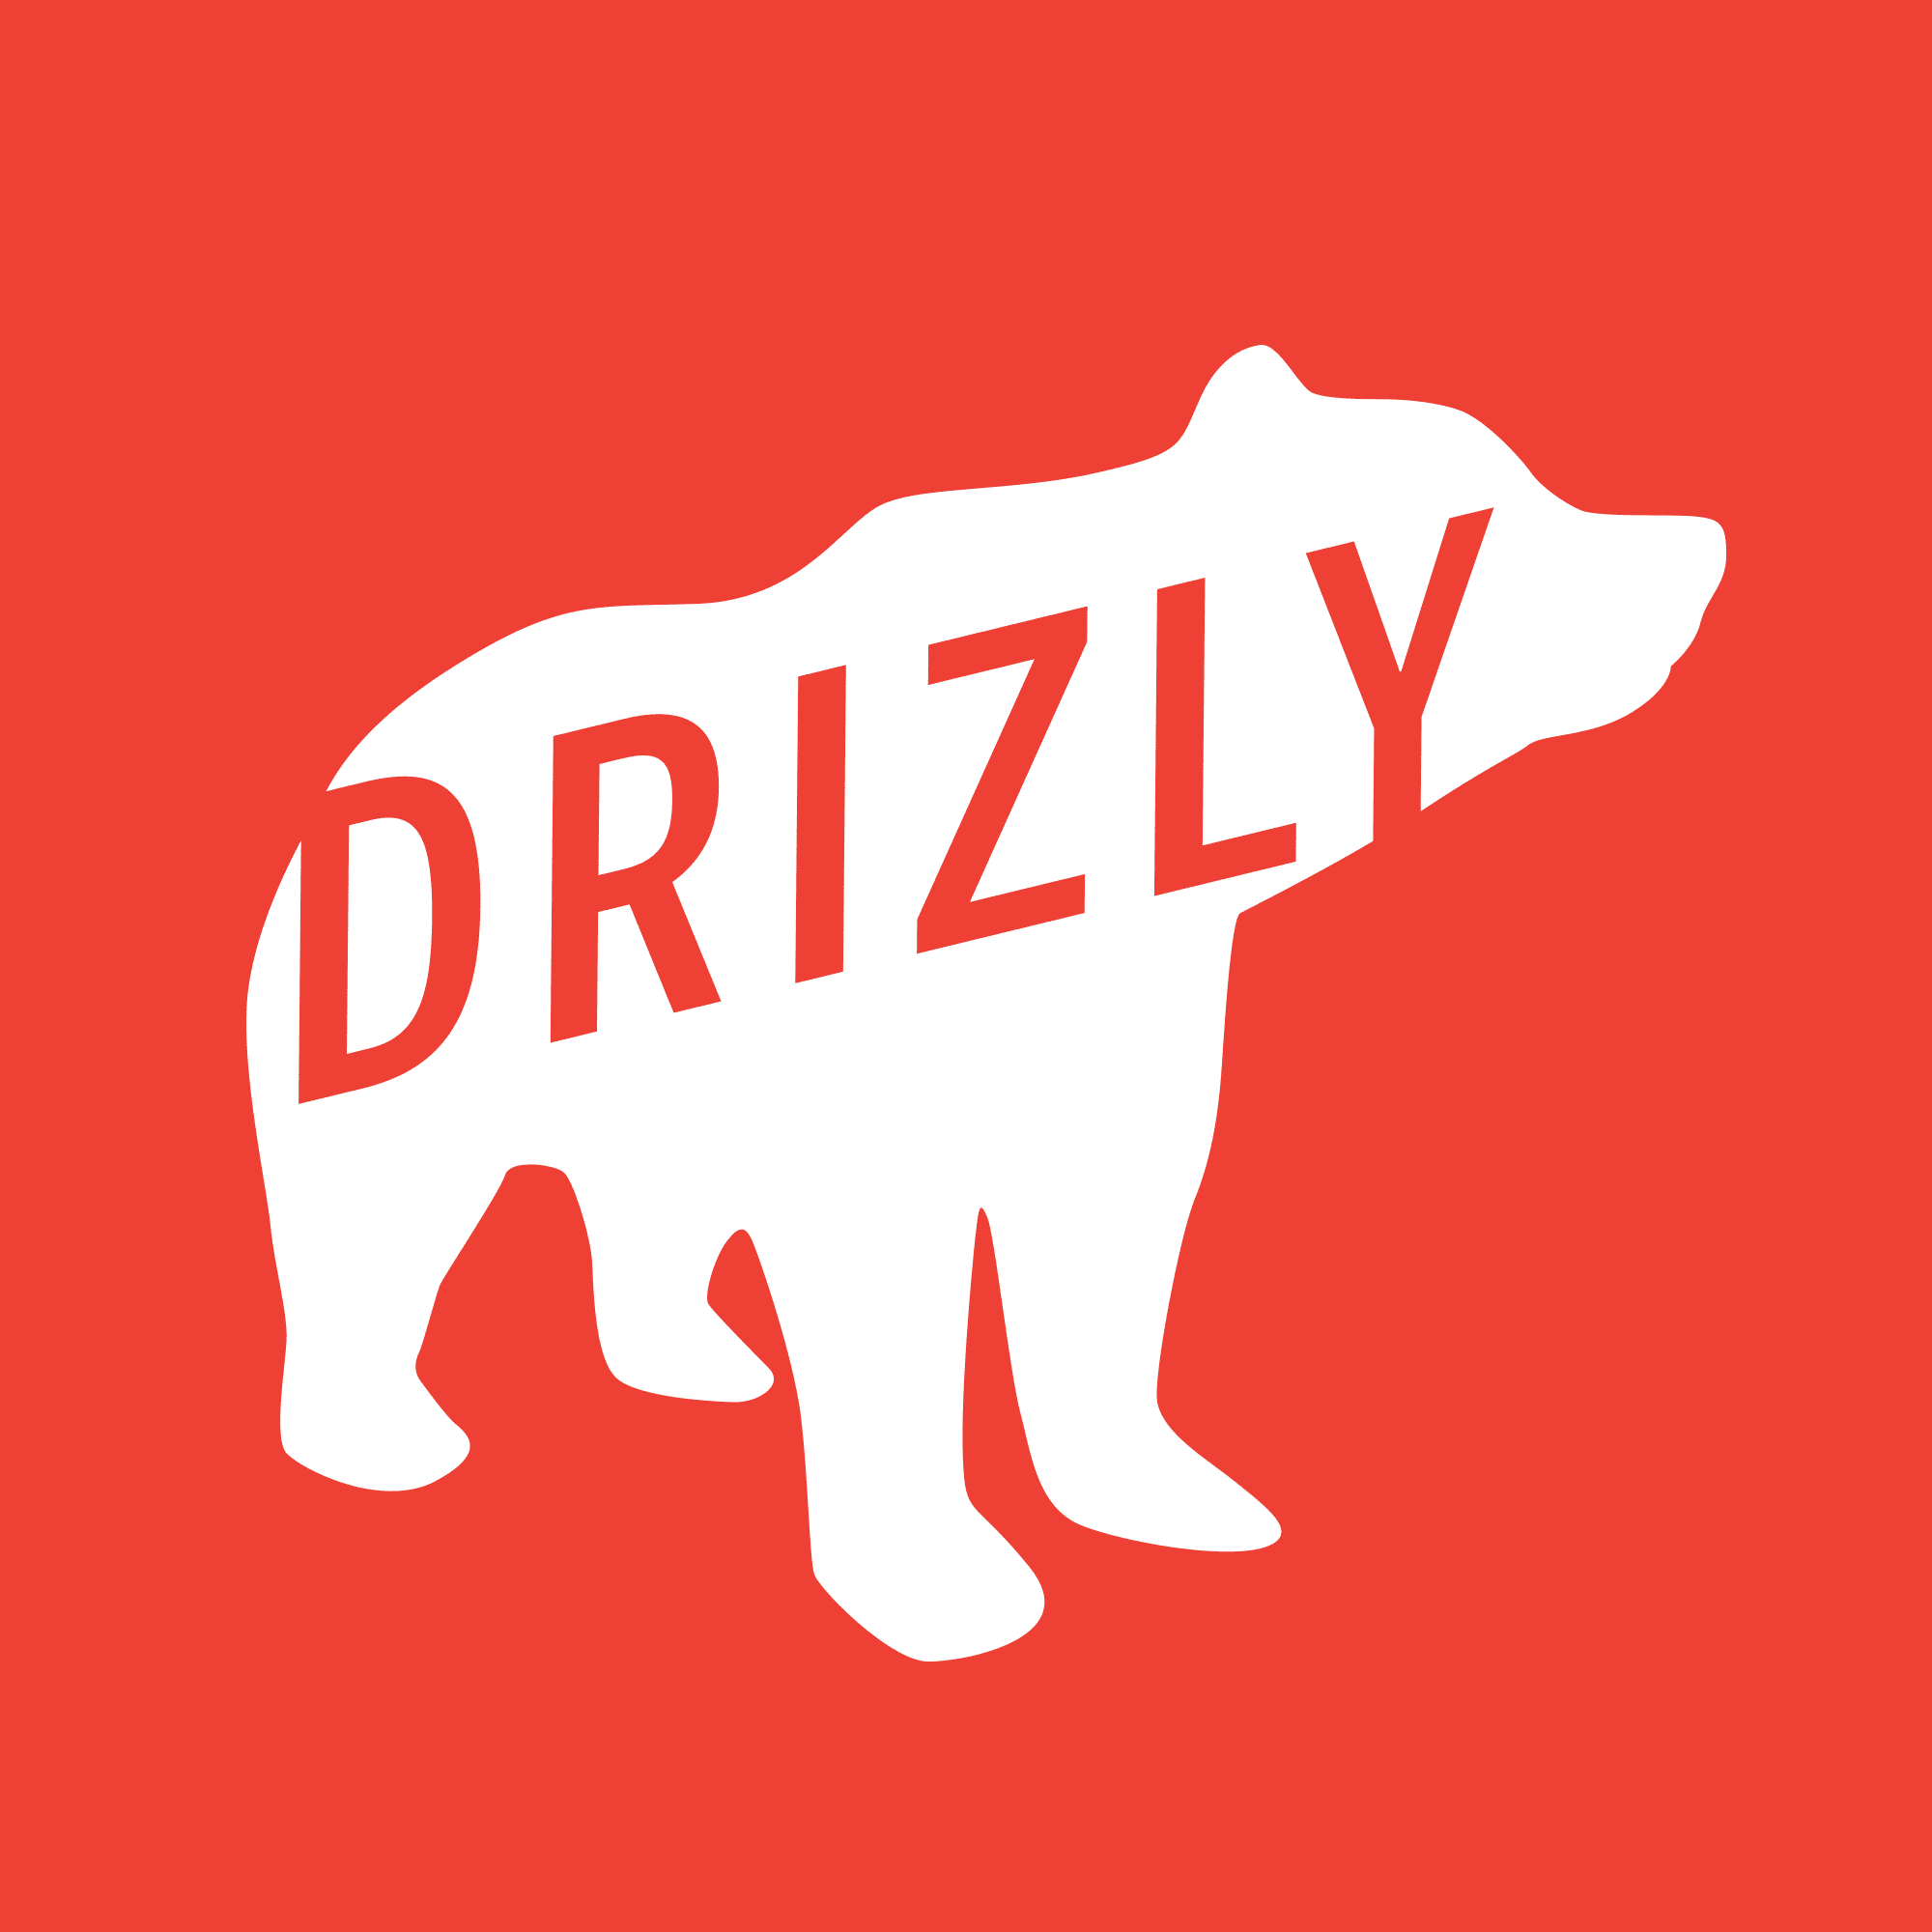 Drizly study suggests bullish outlook for holiday sales 